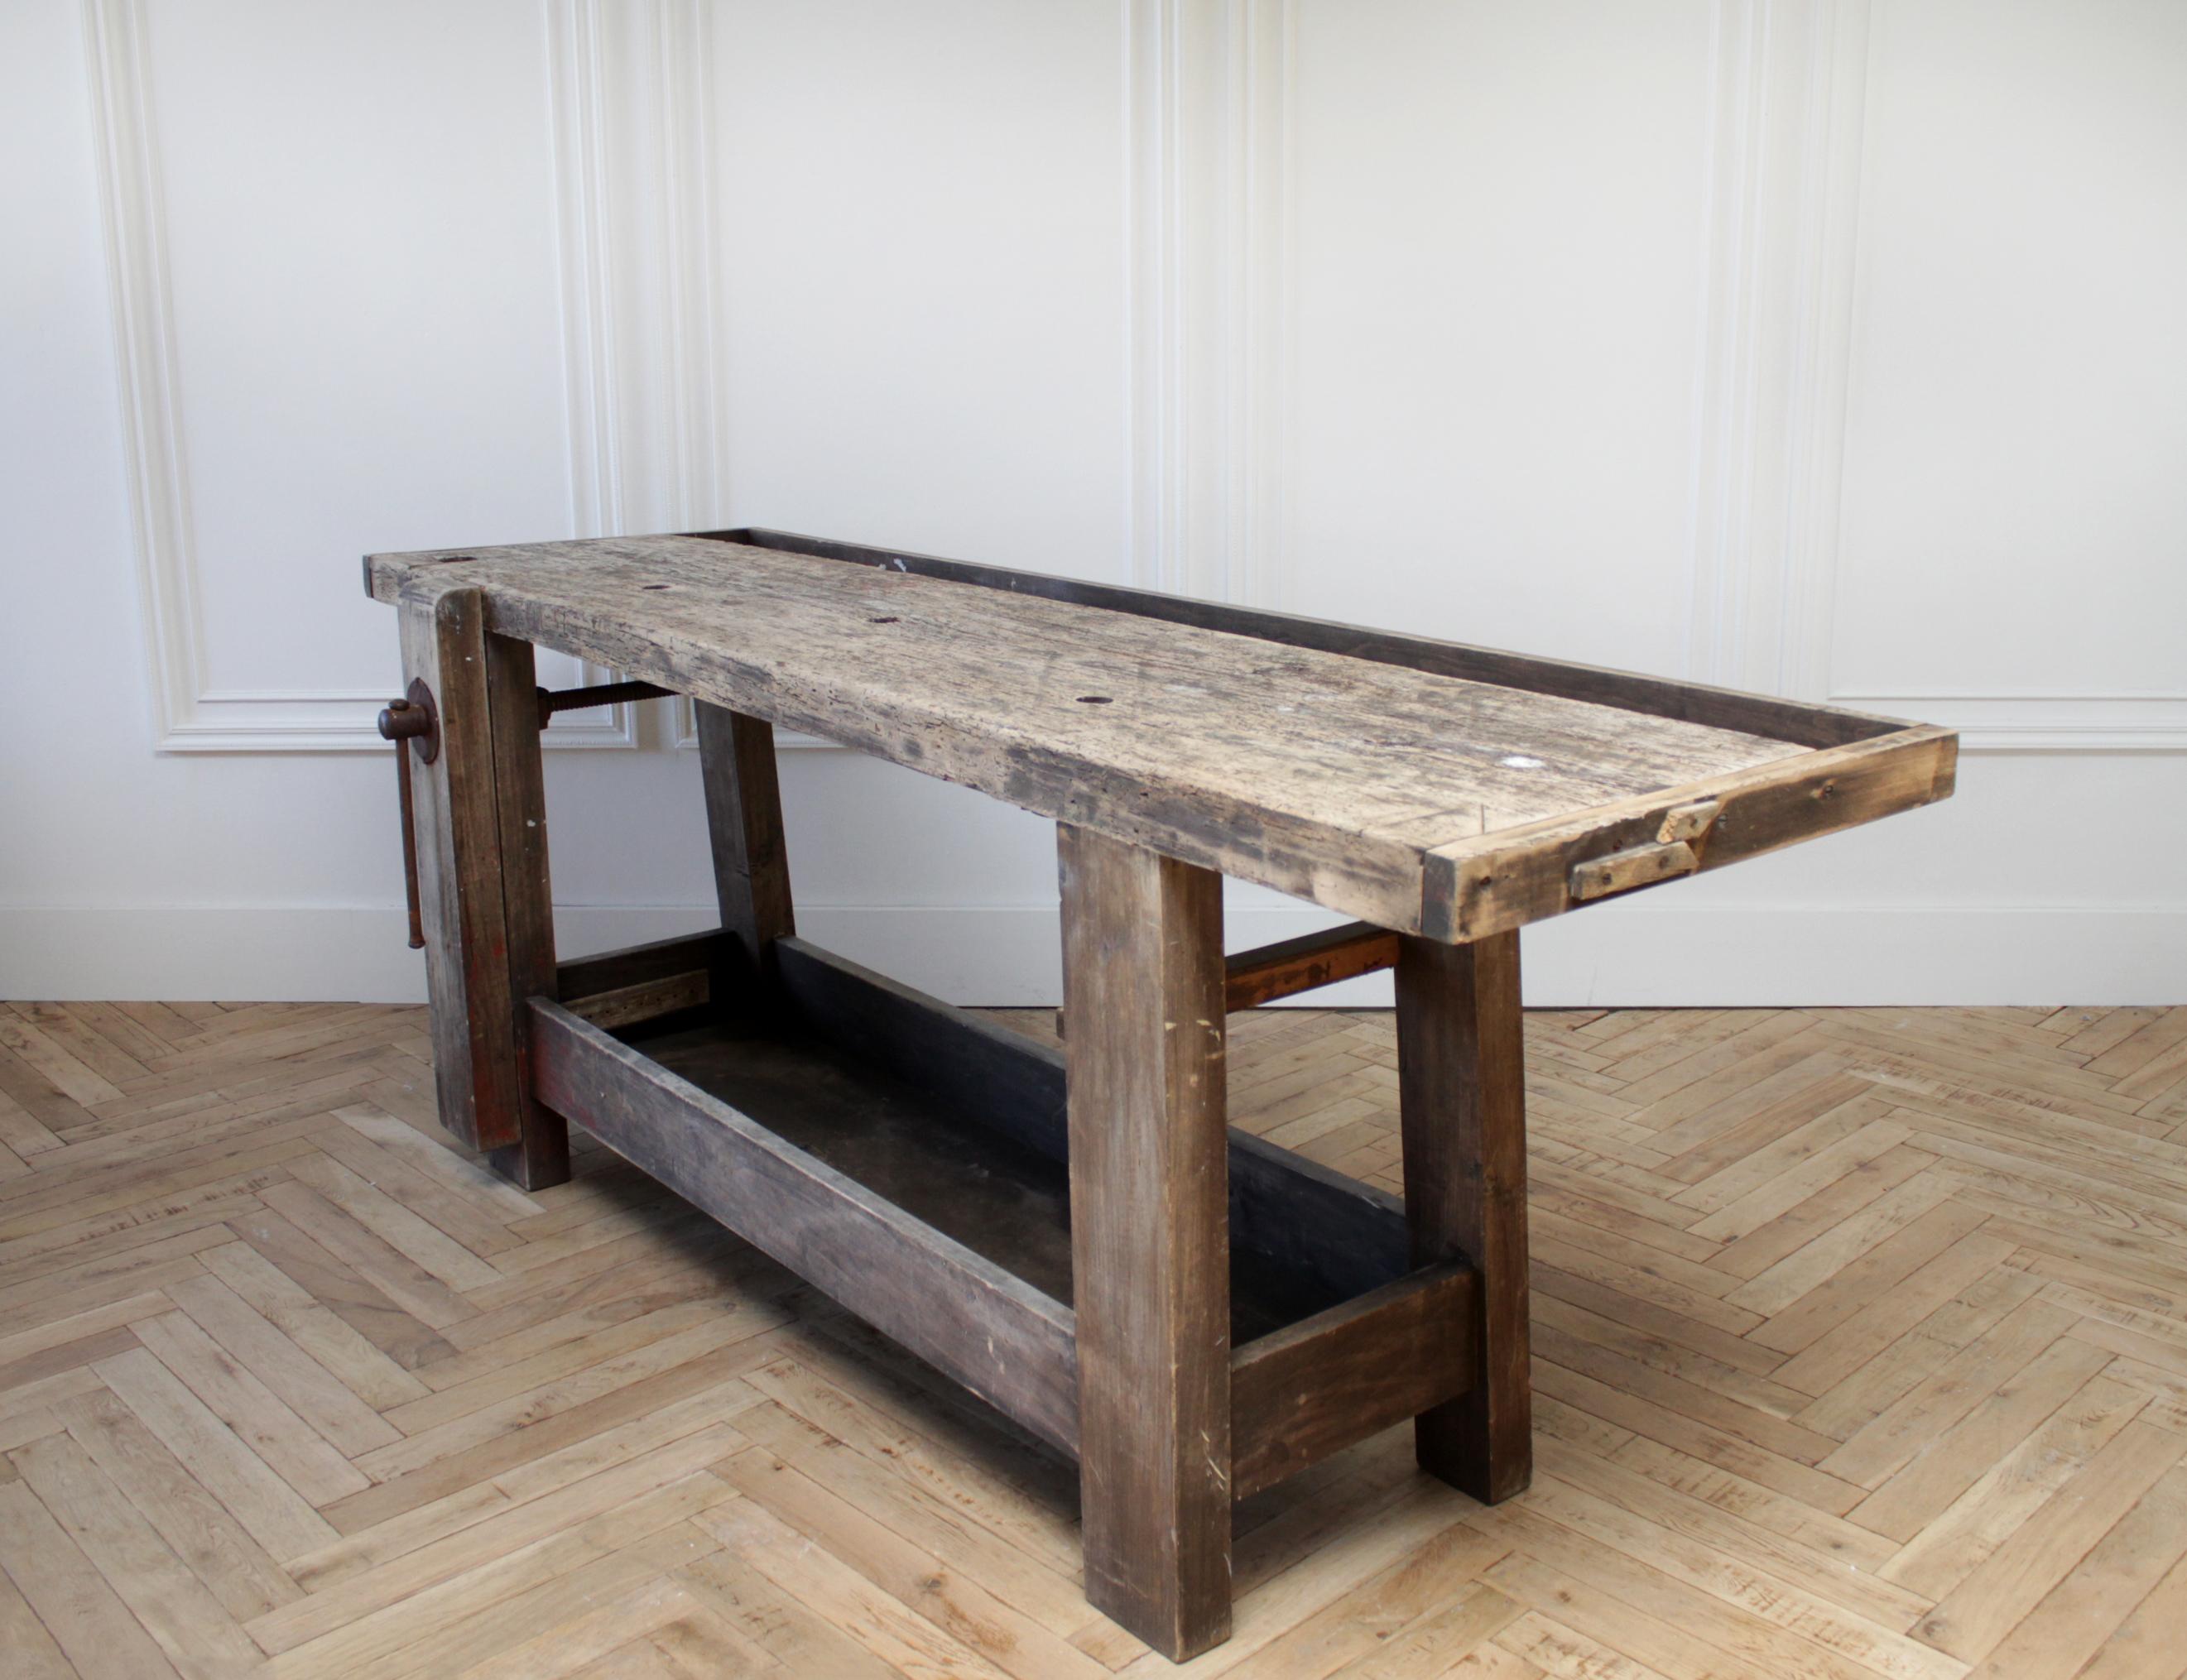 Rustic Early 20th Century Work Console Table with Original Hardware